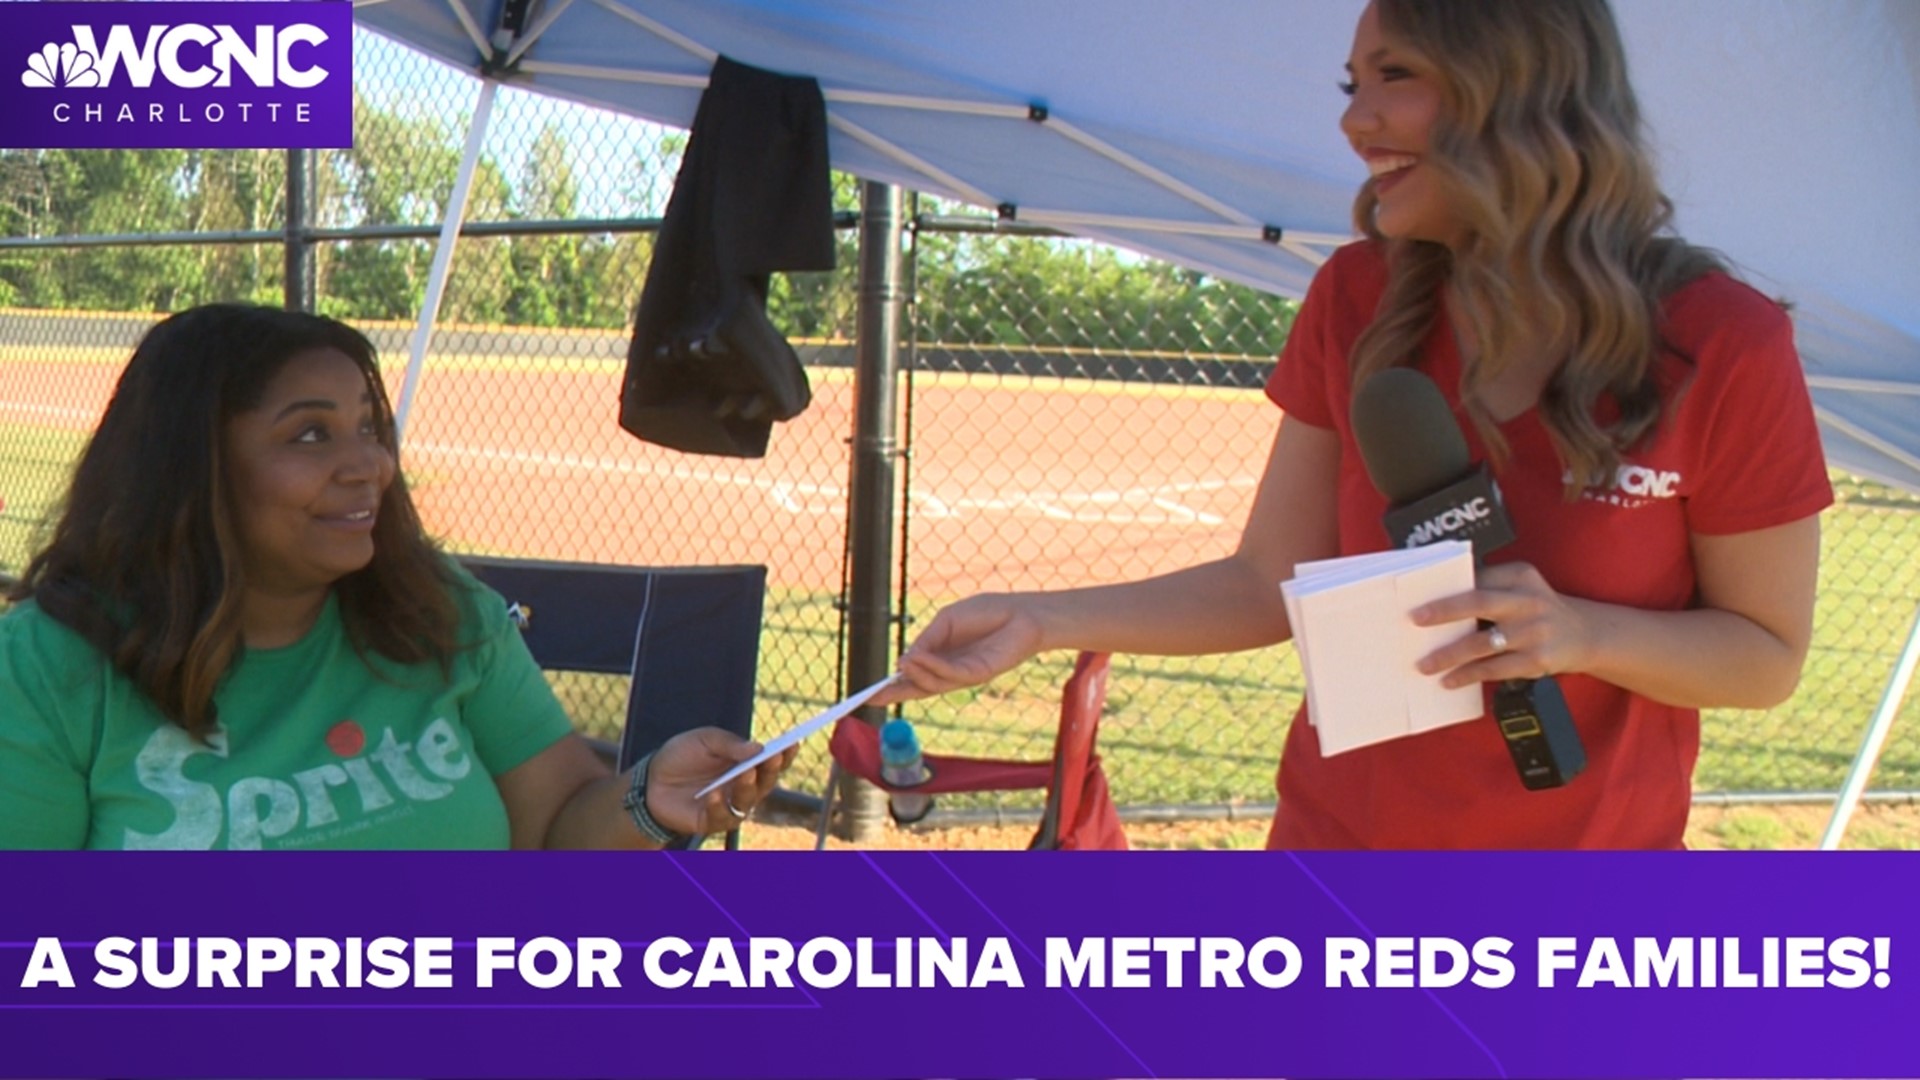 We went out to the Tuckaseegee dream fields tonight to surprise some of the families with the Carolinas Metro Reds!